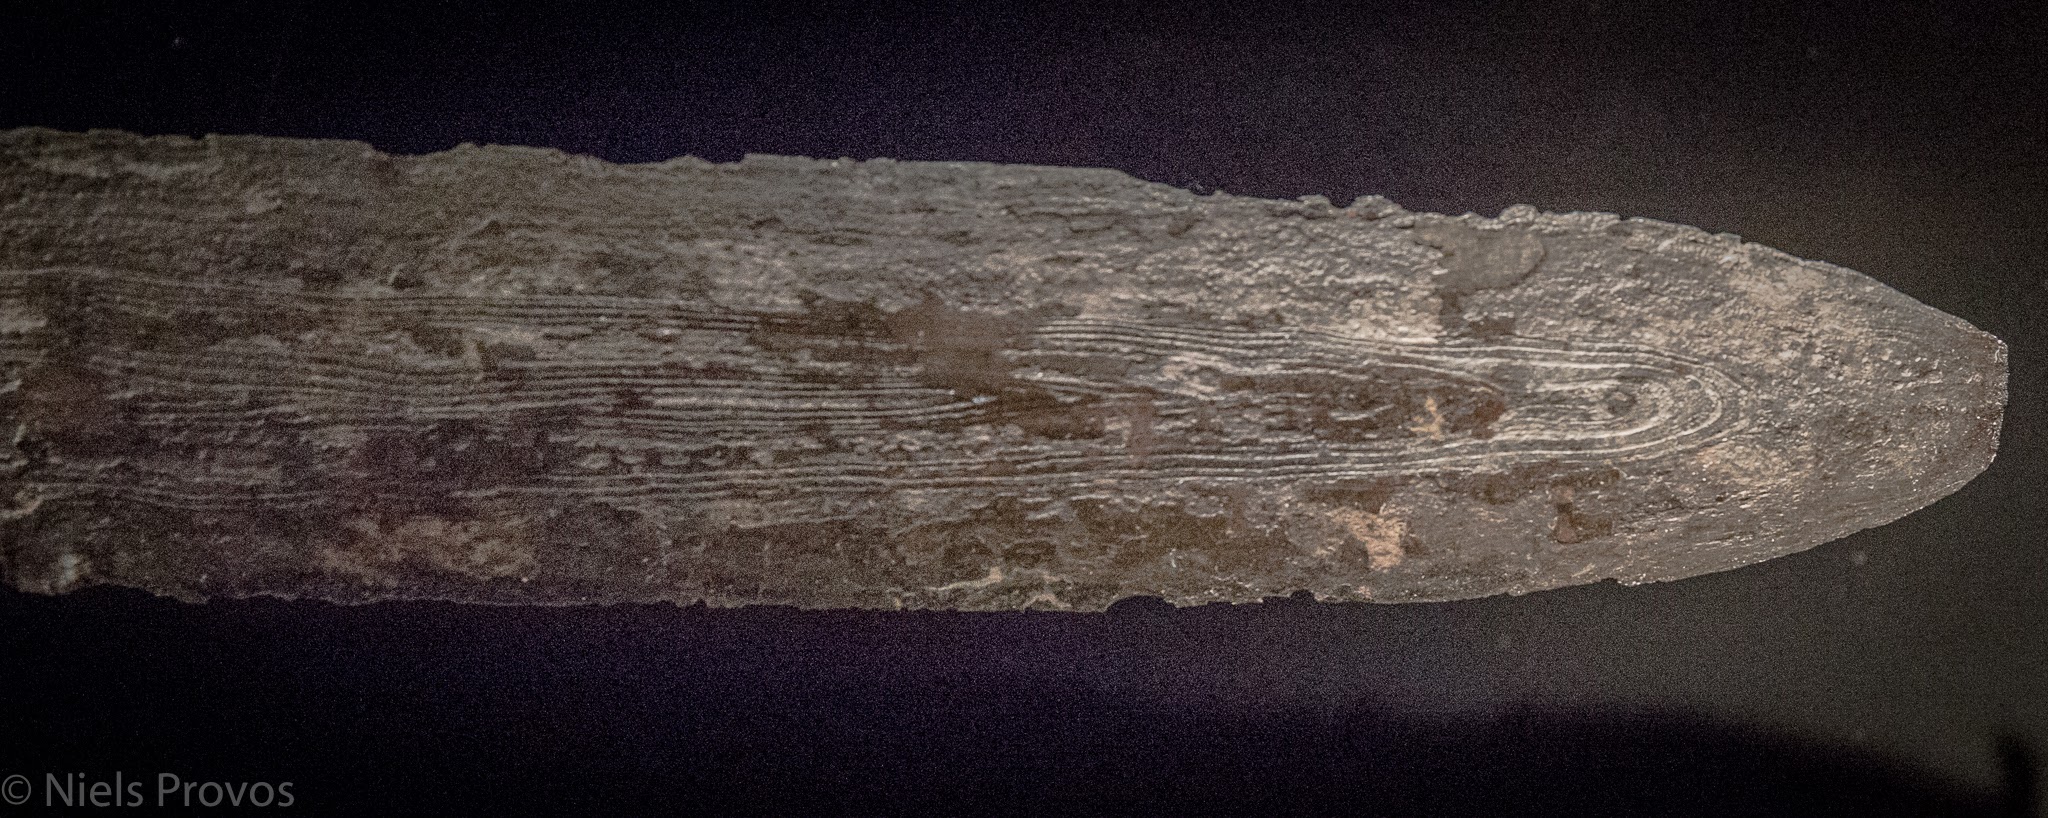 Tip of a sword blade from Illerup Ådal